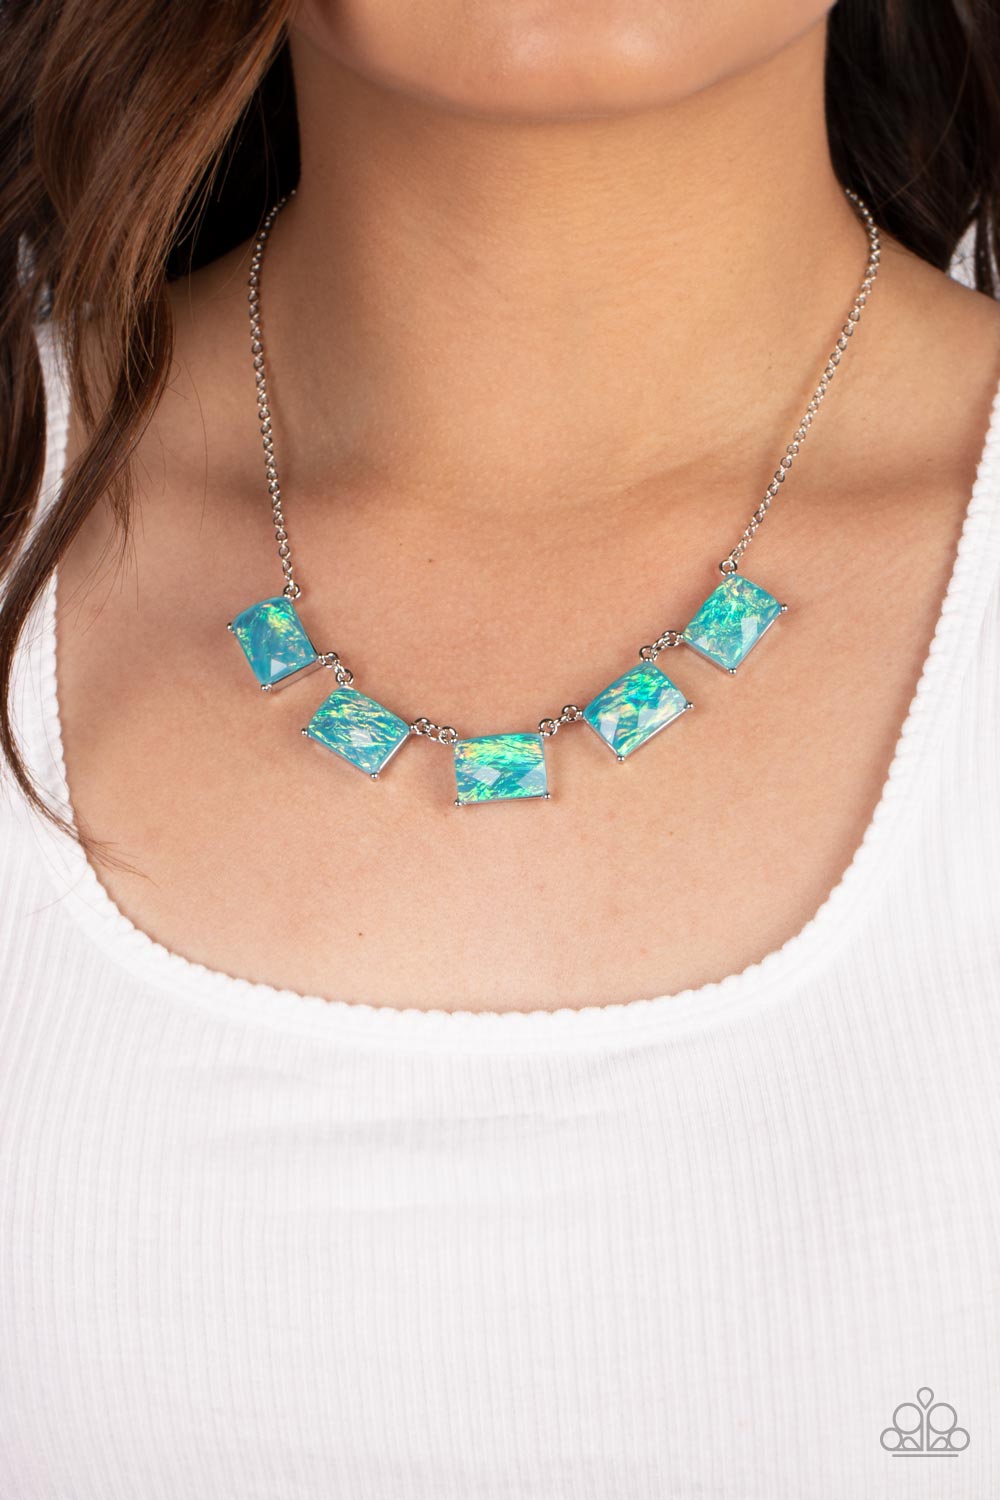 Opalescent Oblivion Blue Necklace - Paparazzi Accessories-on model - CarasShop.com - $5 Jewelry by Cara Jewels